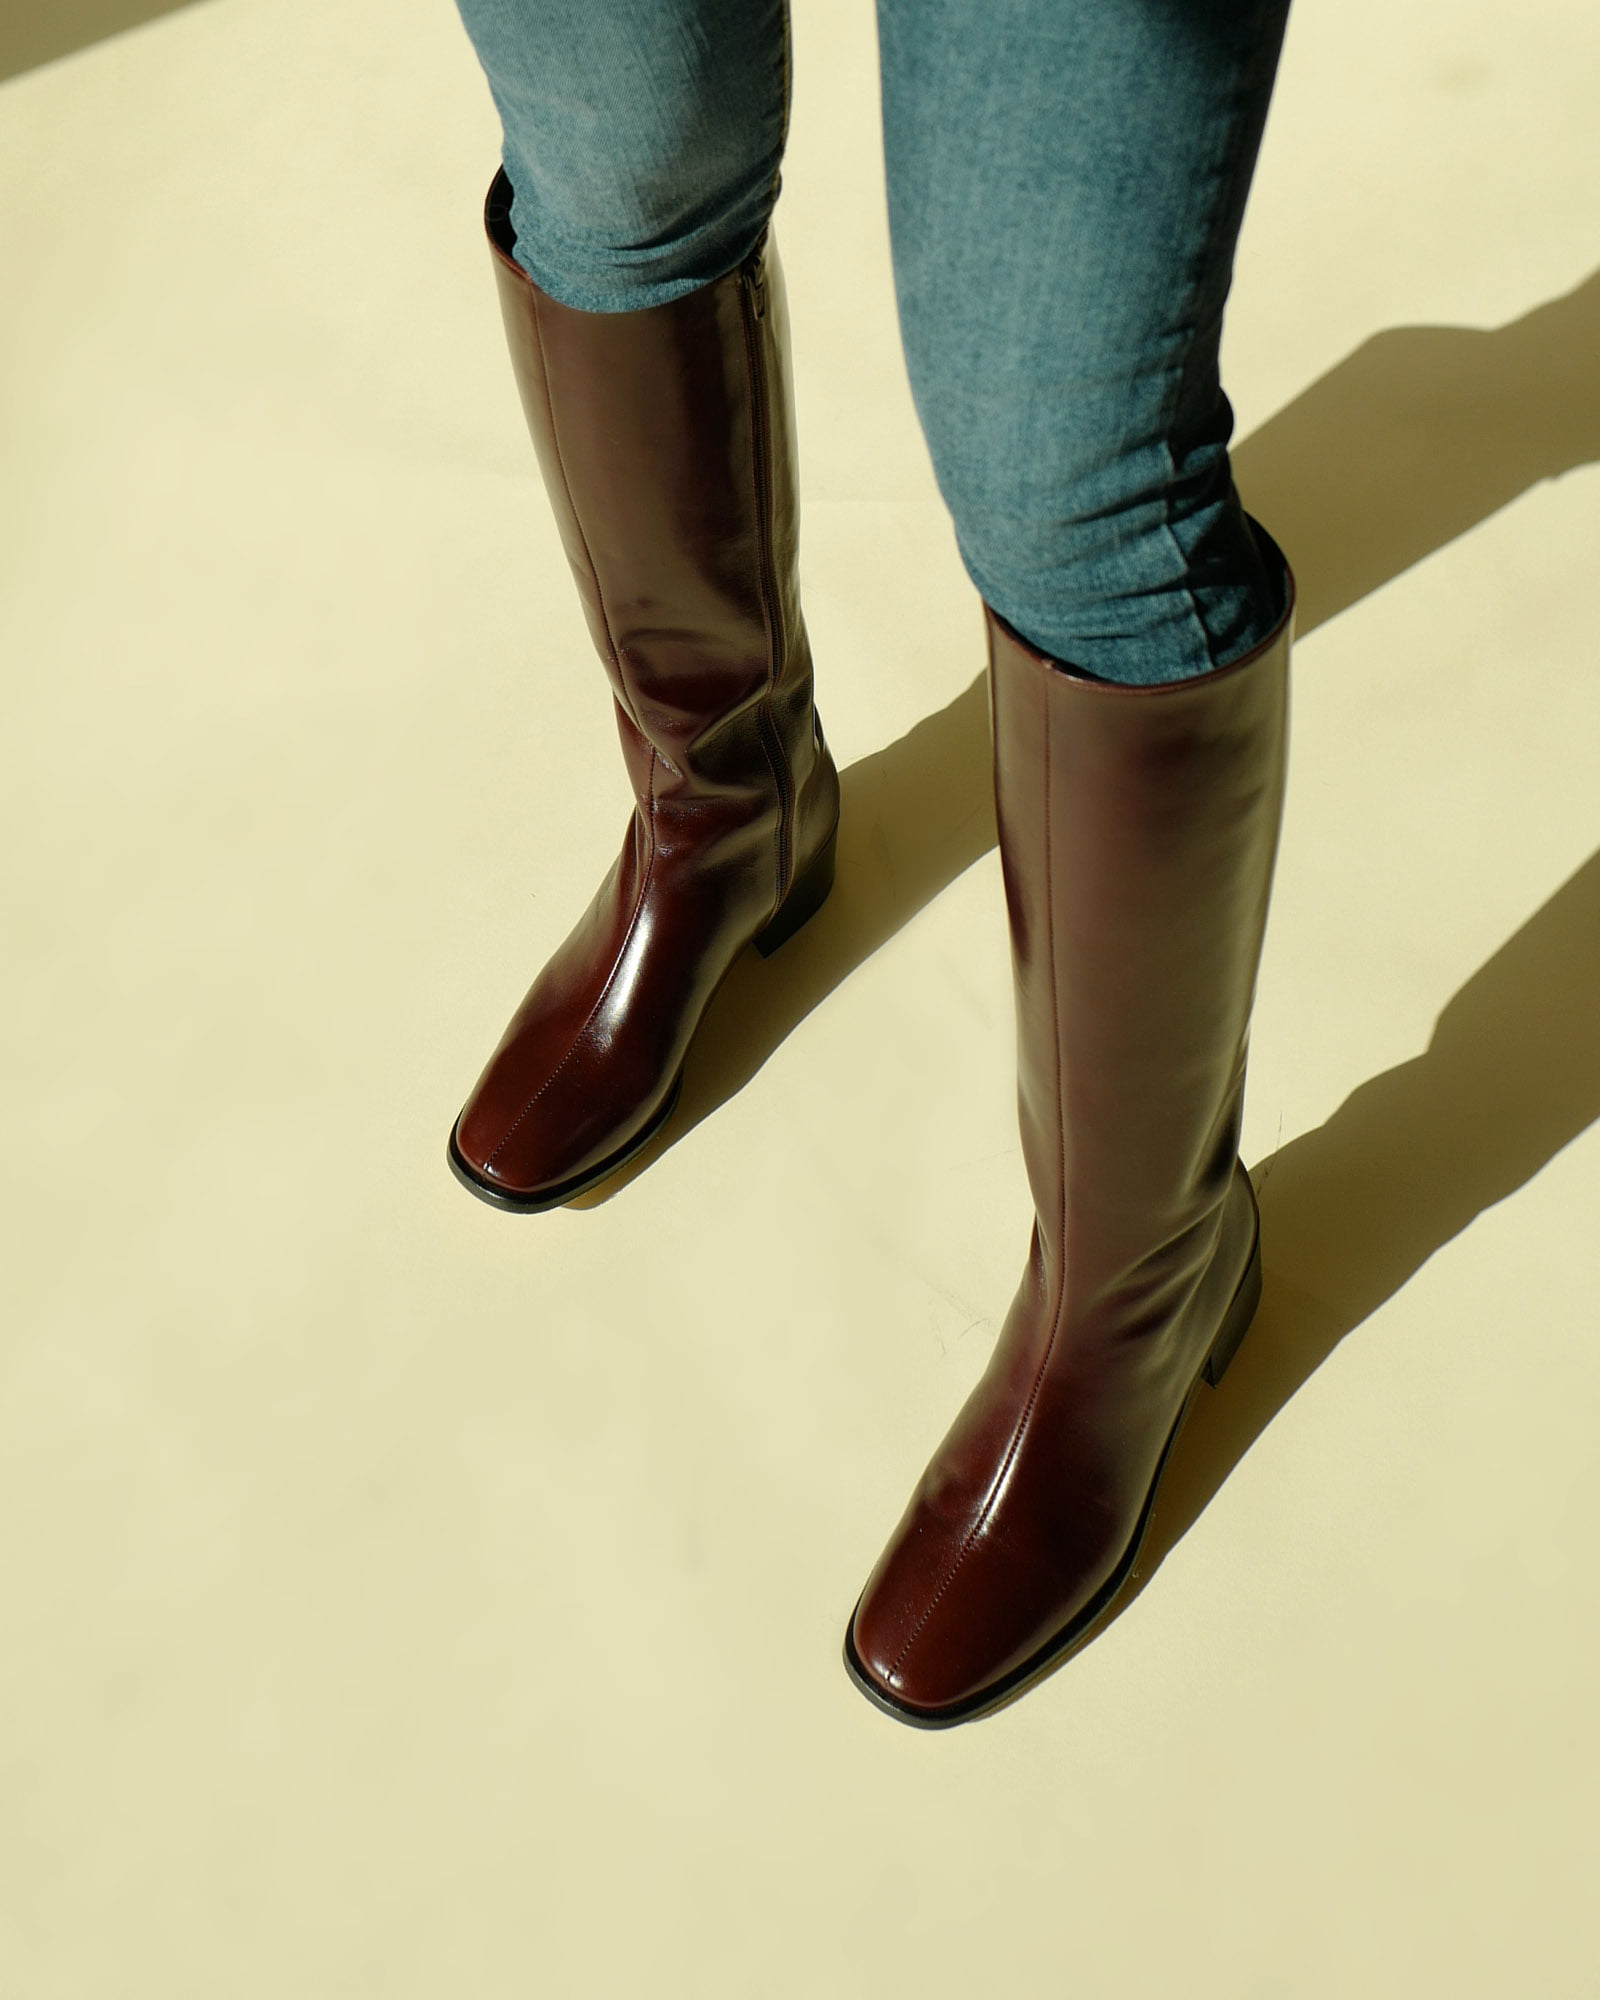 Beaucoup Riding Boots